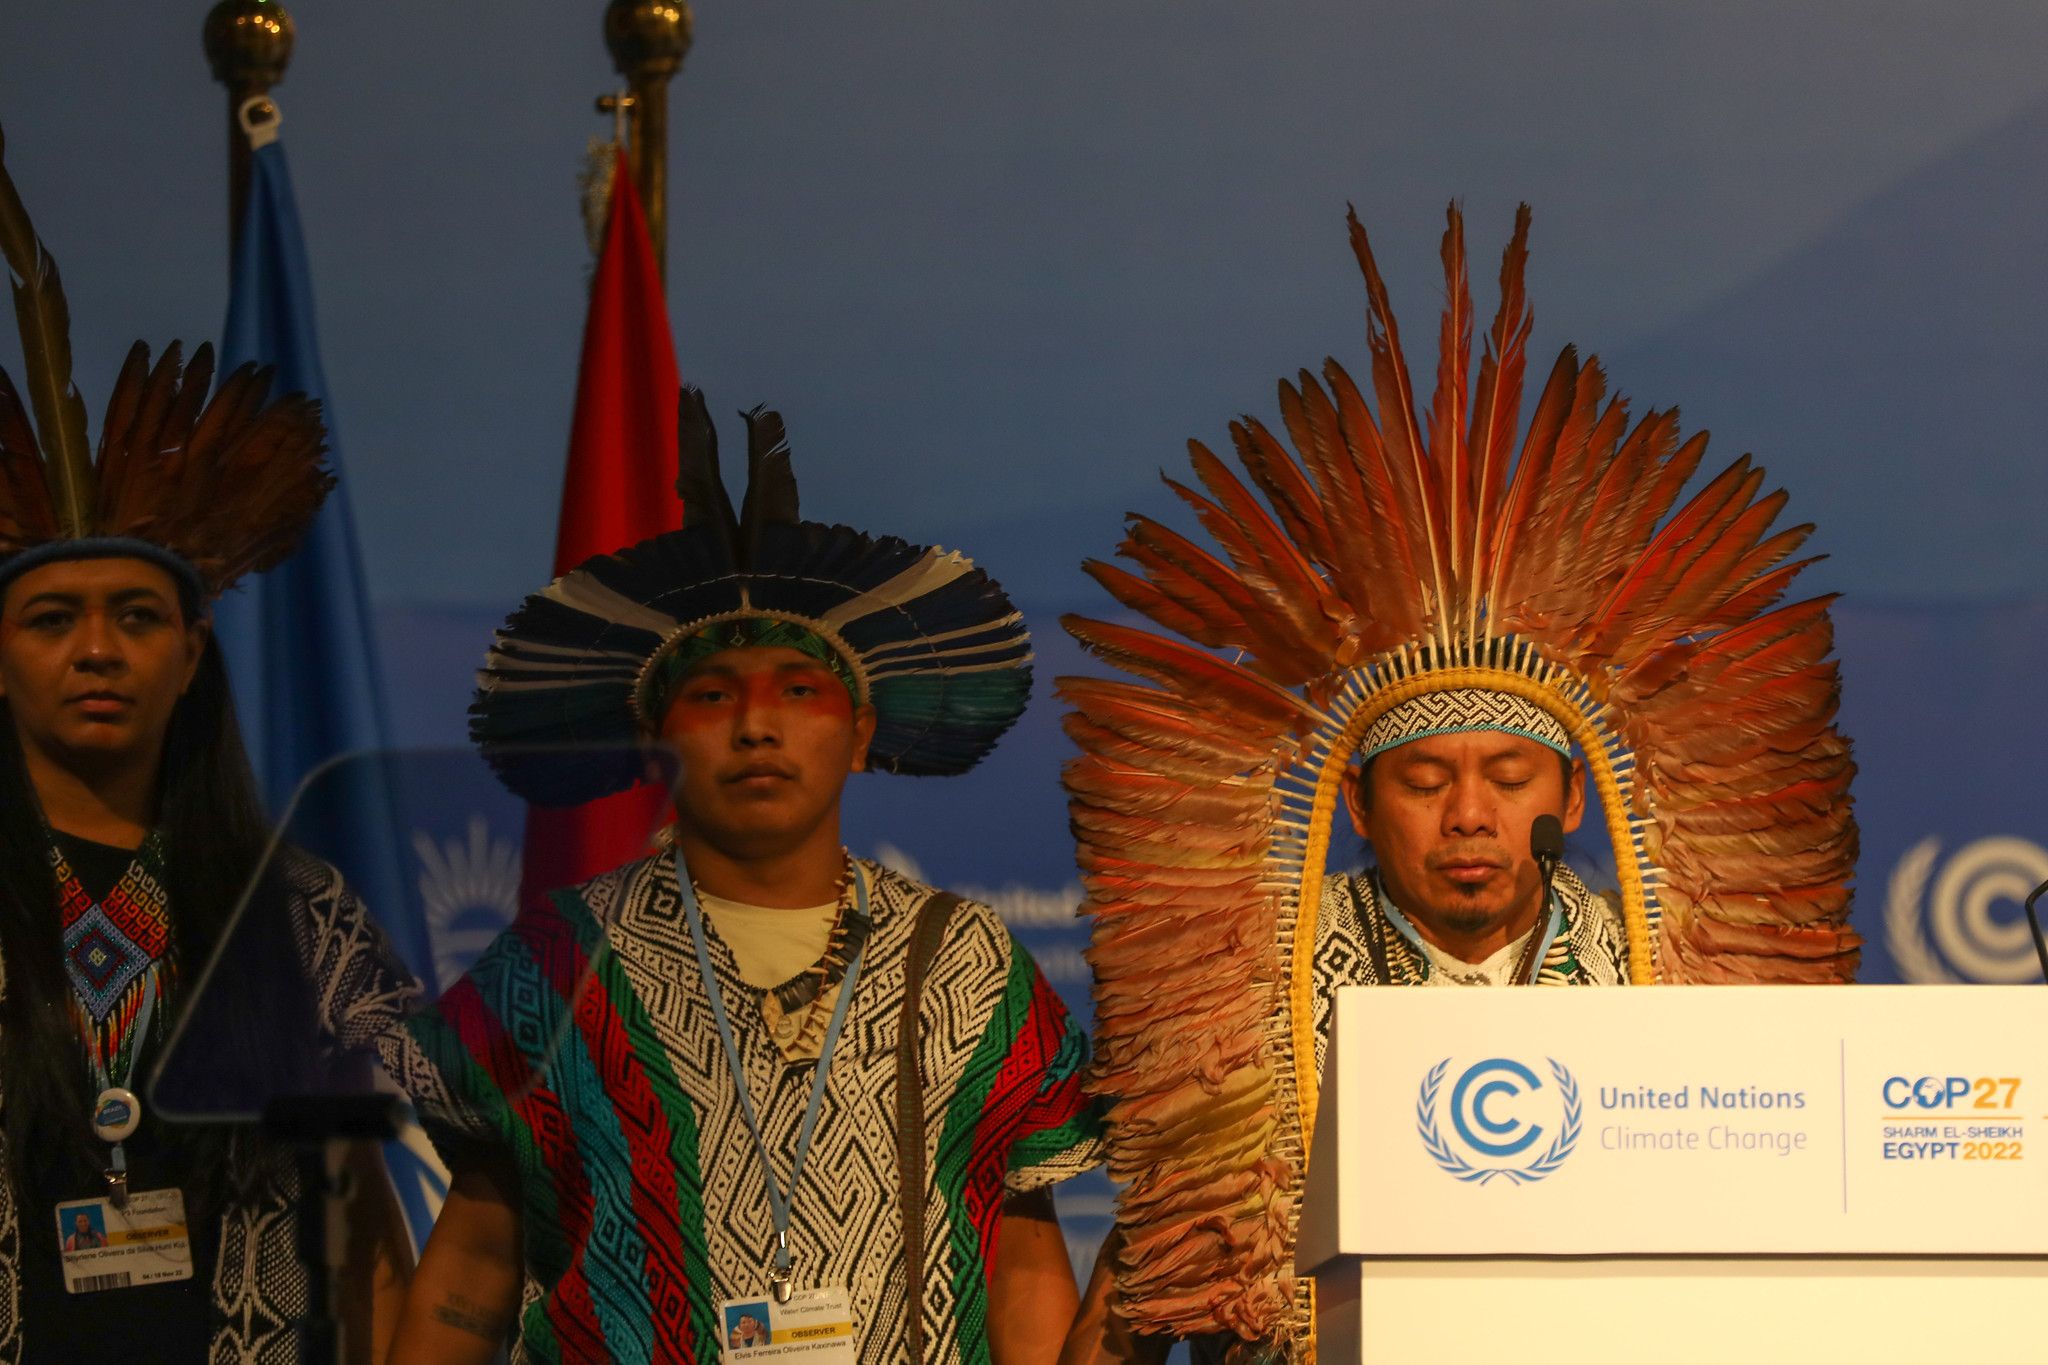 Indigenous leaders from Brazil speaking at COP27